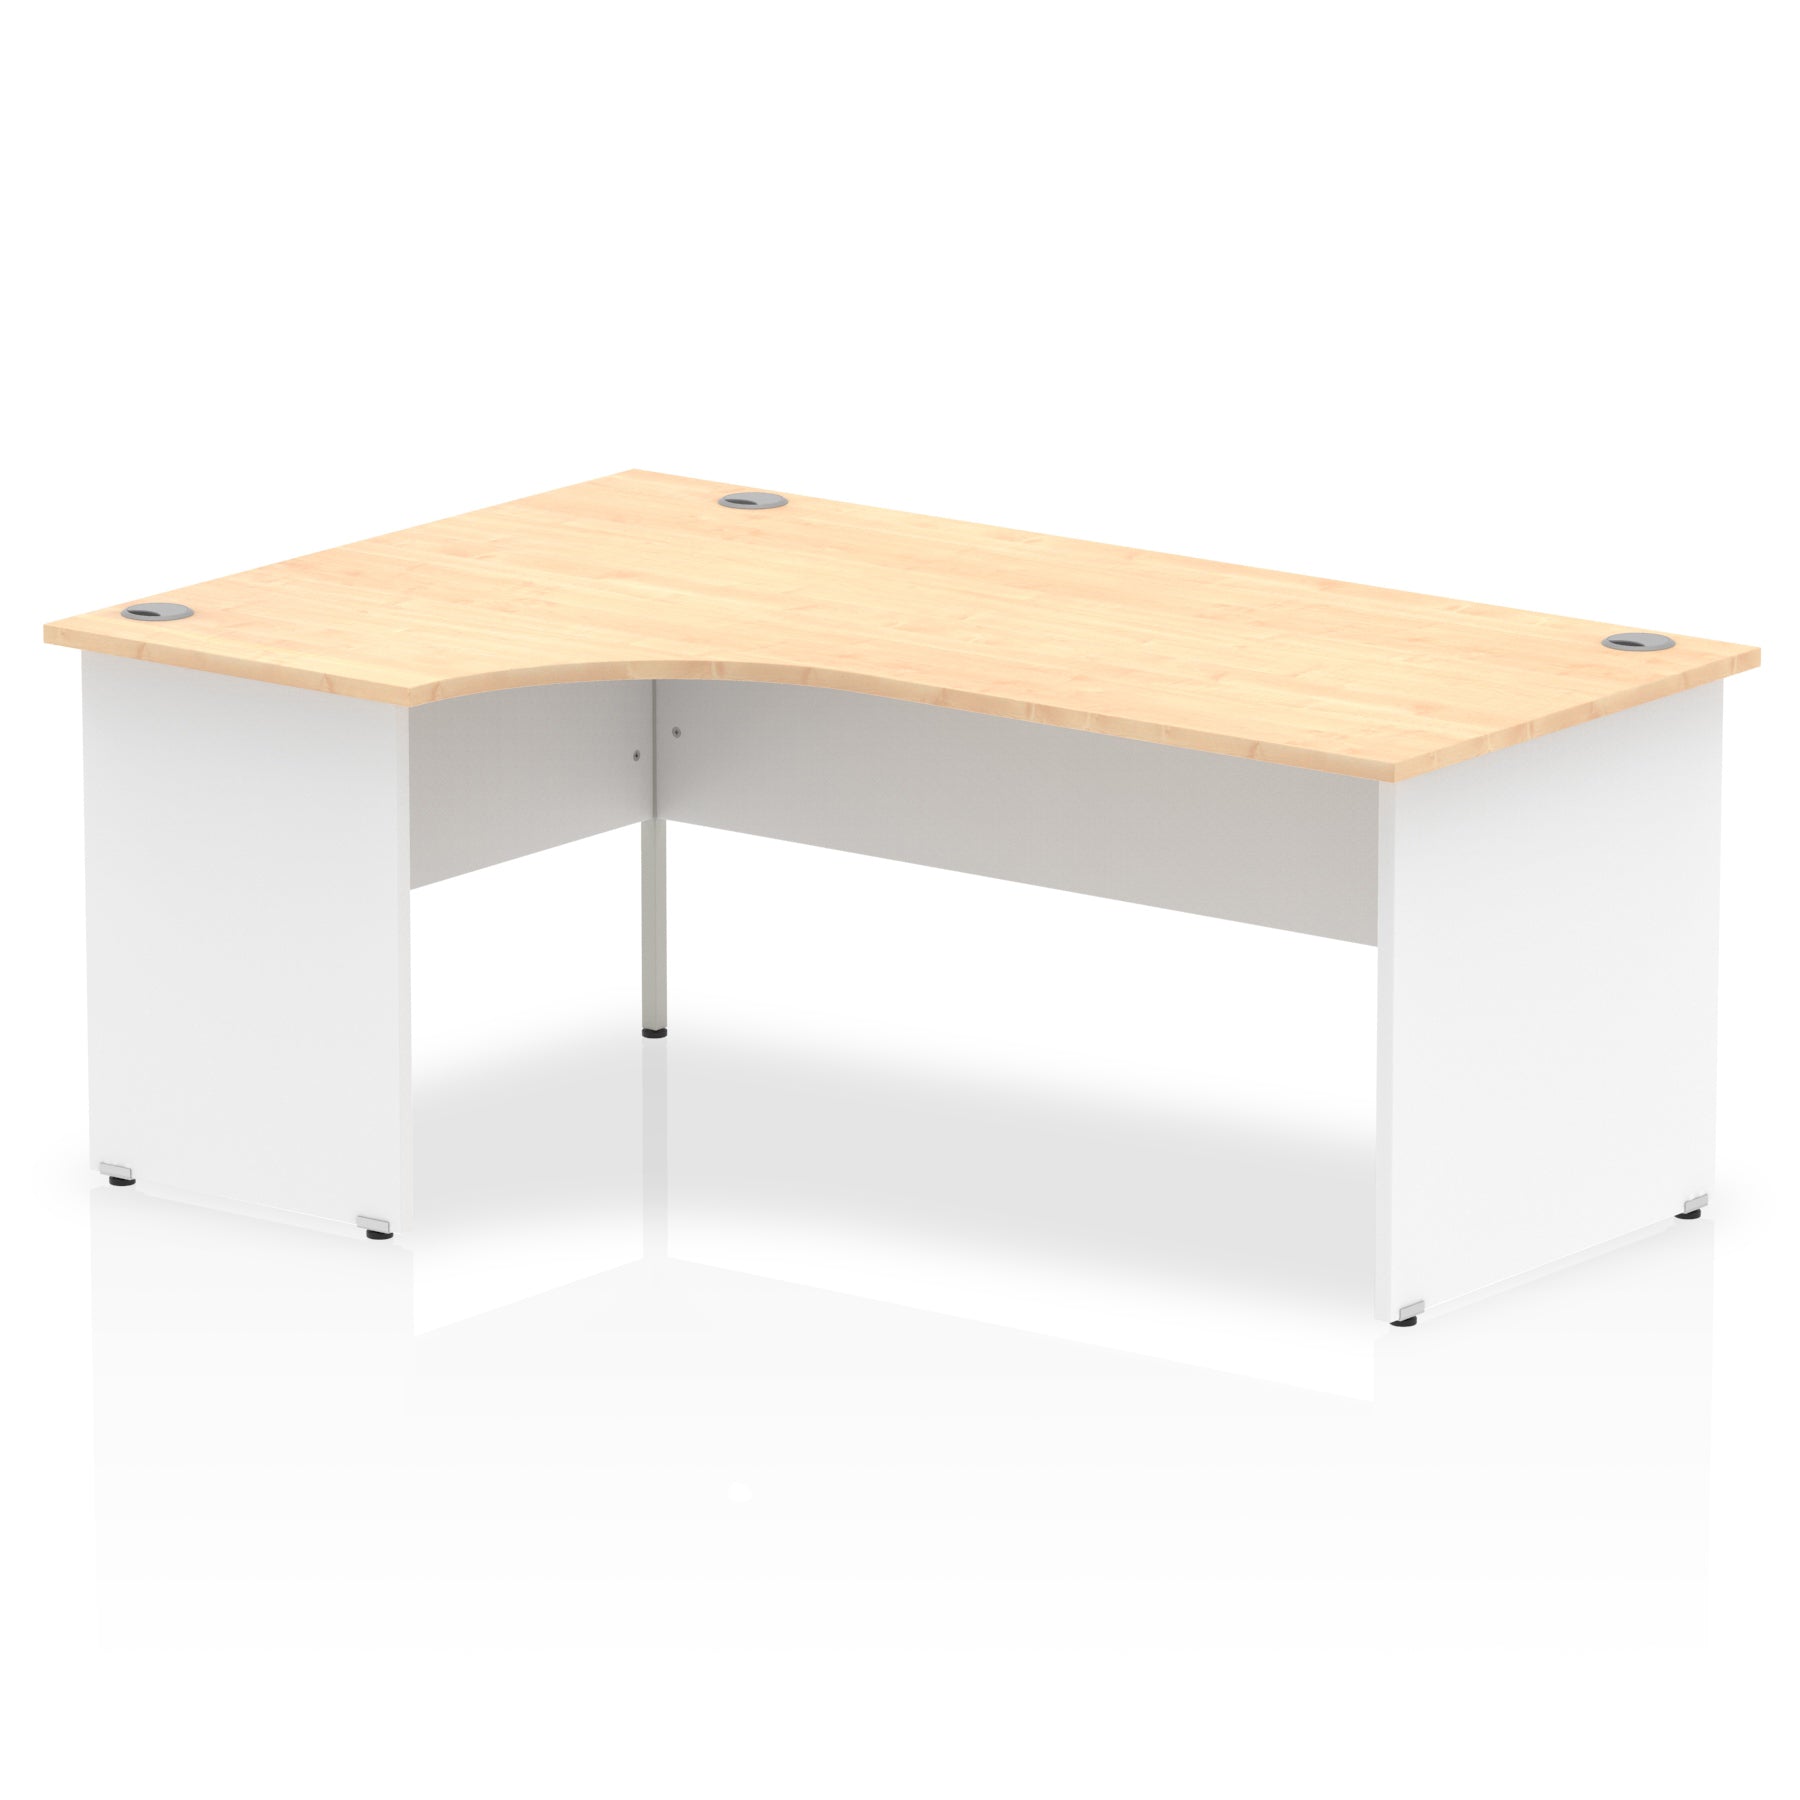 Impulse 1800mm Left Crescent Corner Desk with Panel End Leg - MFC Material, 1800x1200 Top, 5-Year Guarantee, Self-Assembly, White Frame